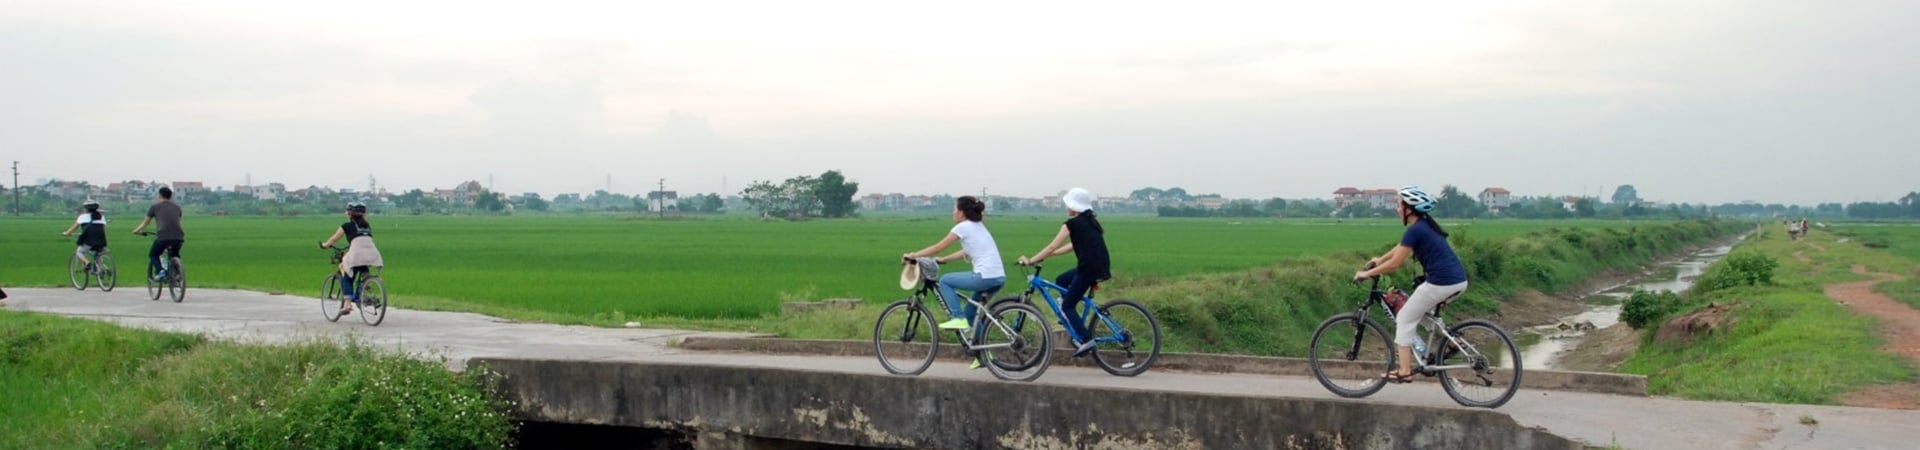 Image of Hanoi Rural Life By Bicycle